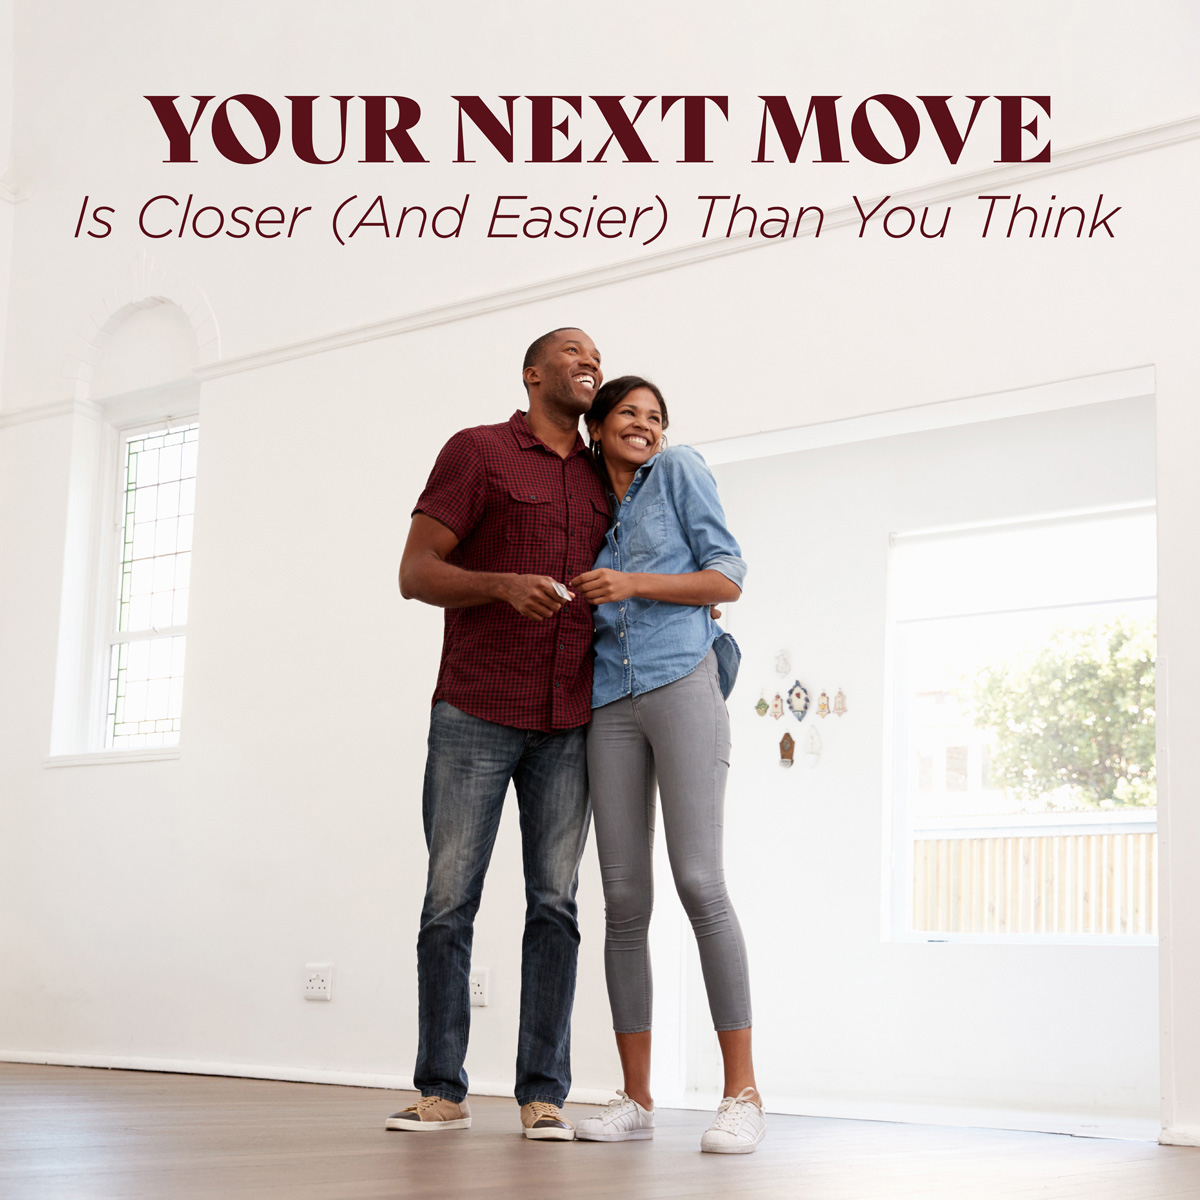 Whether you’re looking for your first home or your next home, we offer hundreds of mortgage products, giving you lower rates, faster closings and more. Don’t wait. See how easy purchasing a home can really be.